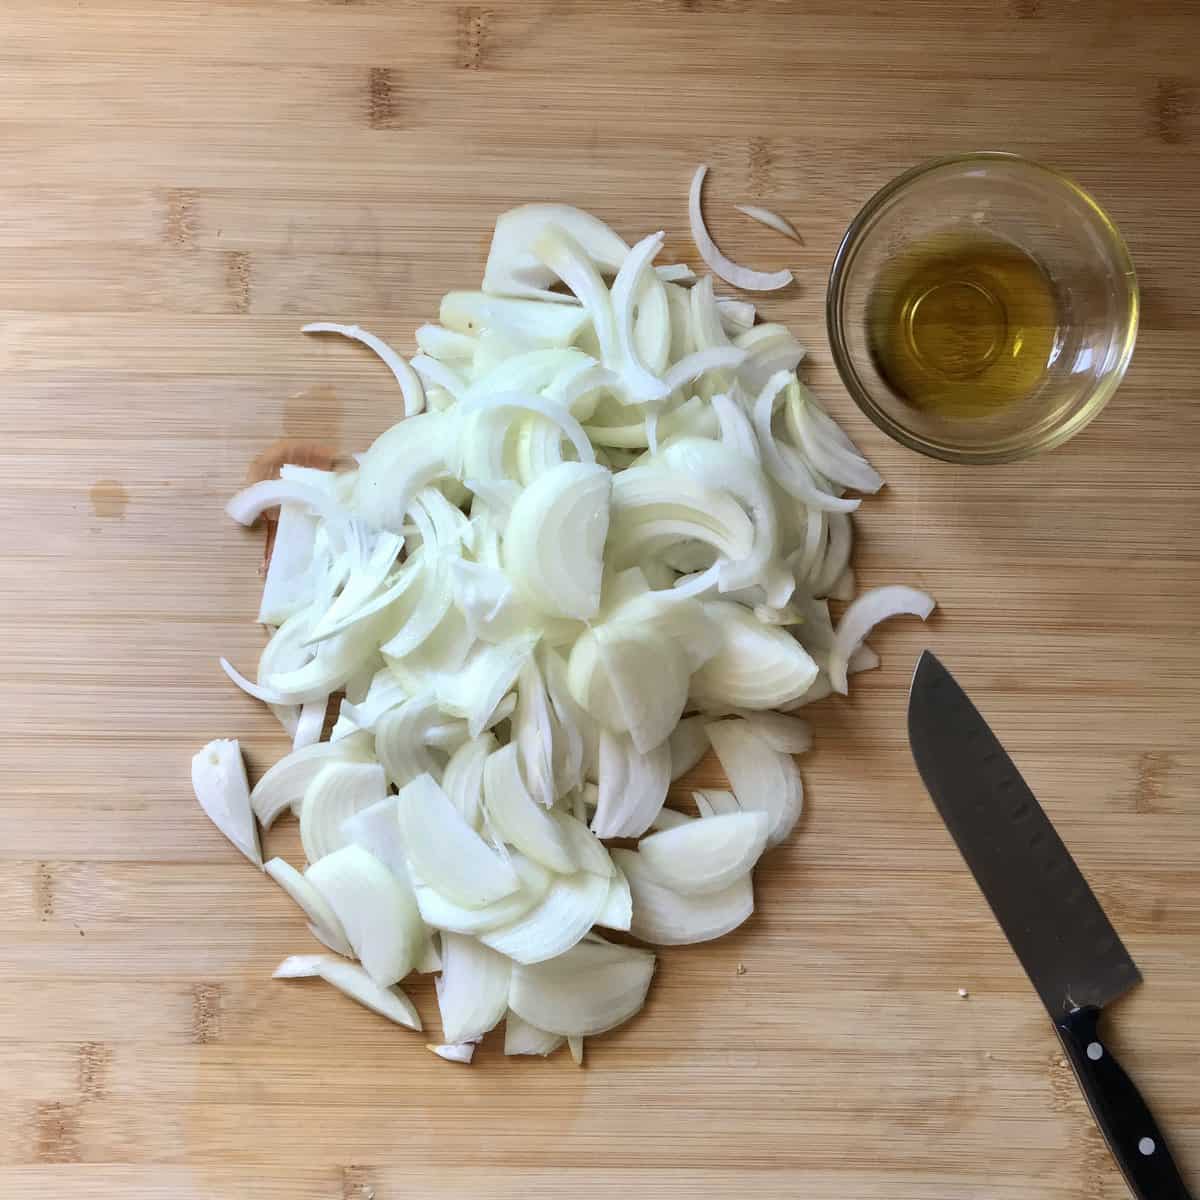 Chopped onions on a wooden board next to a knife and a bowl of olive oil.